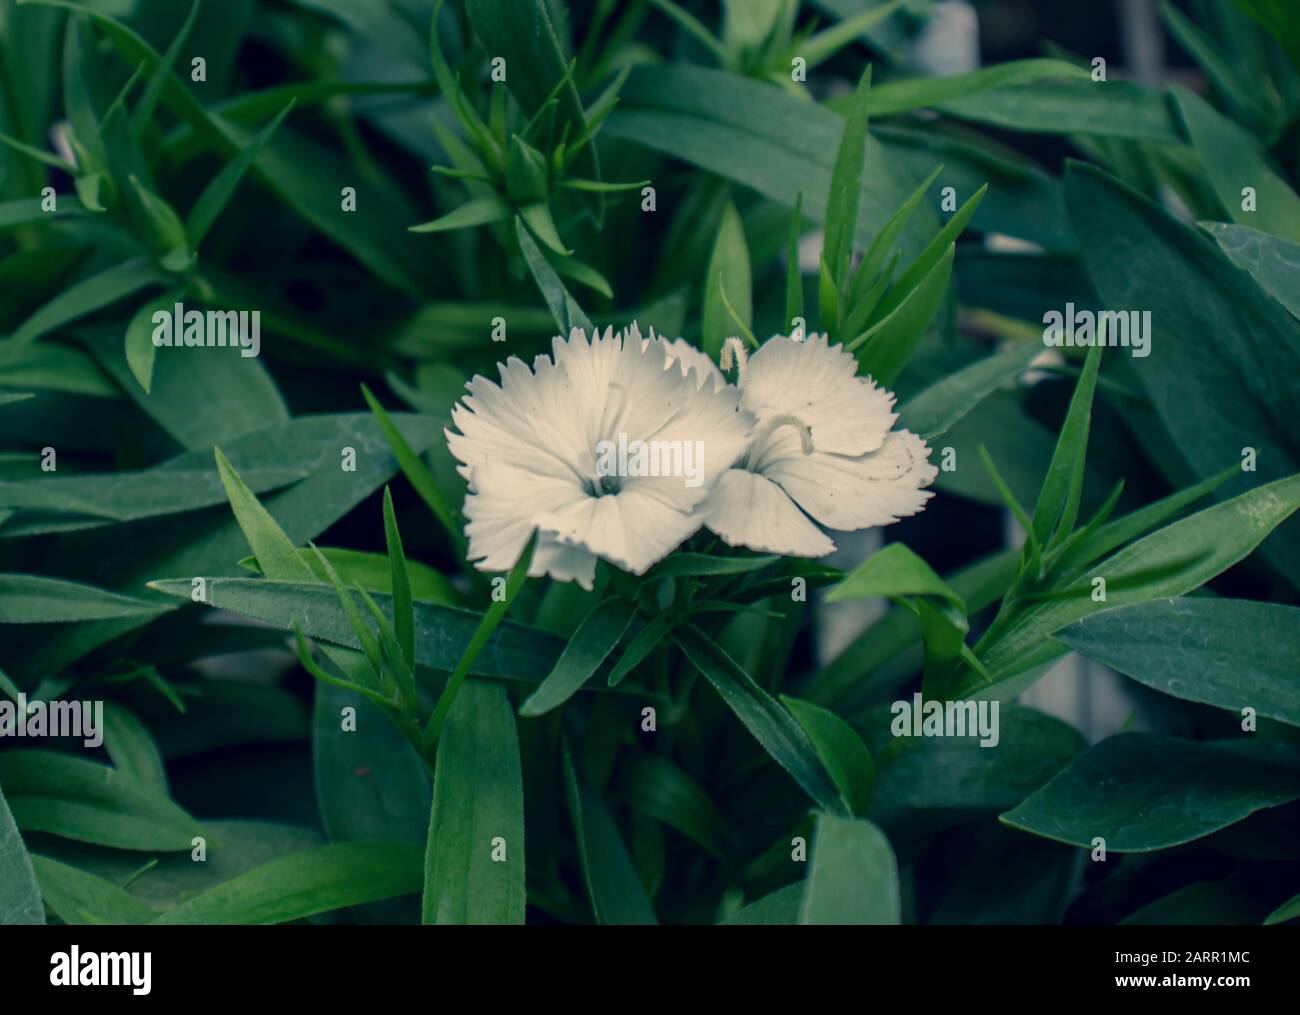 White Dianthus flower plant in bloom outdoors. Stock Photo